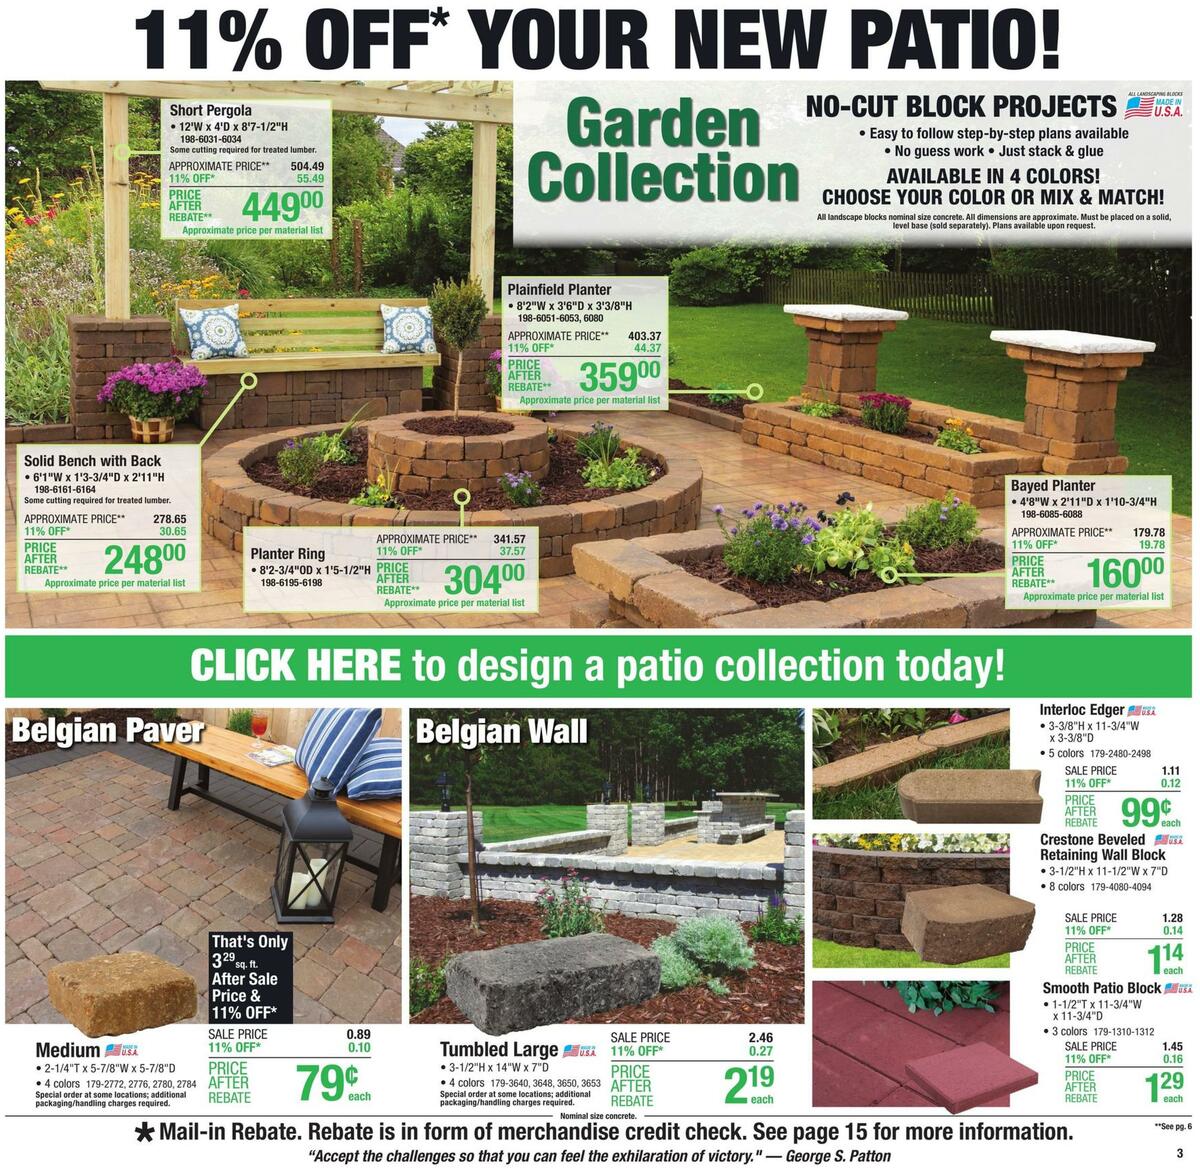 Menards Weekly Ad from February 23